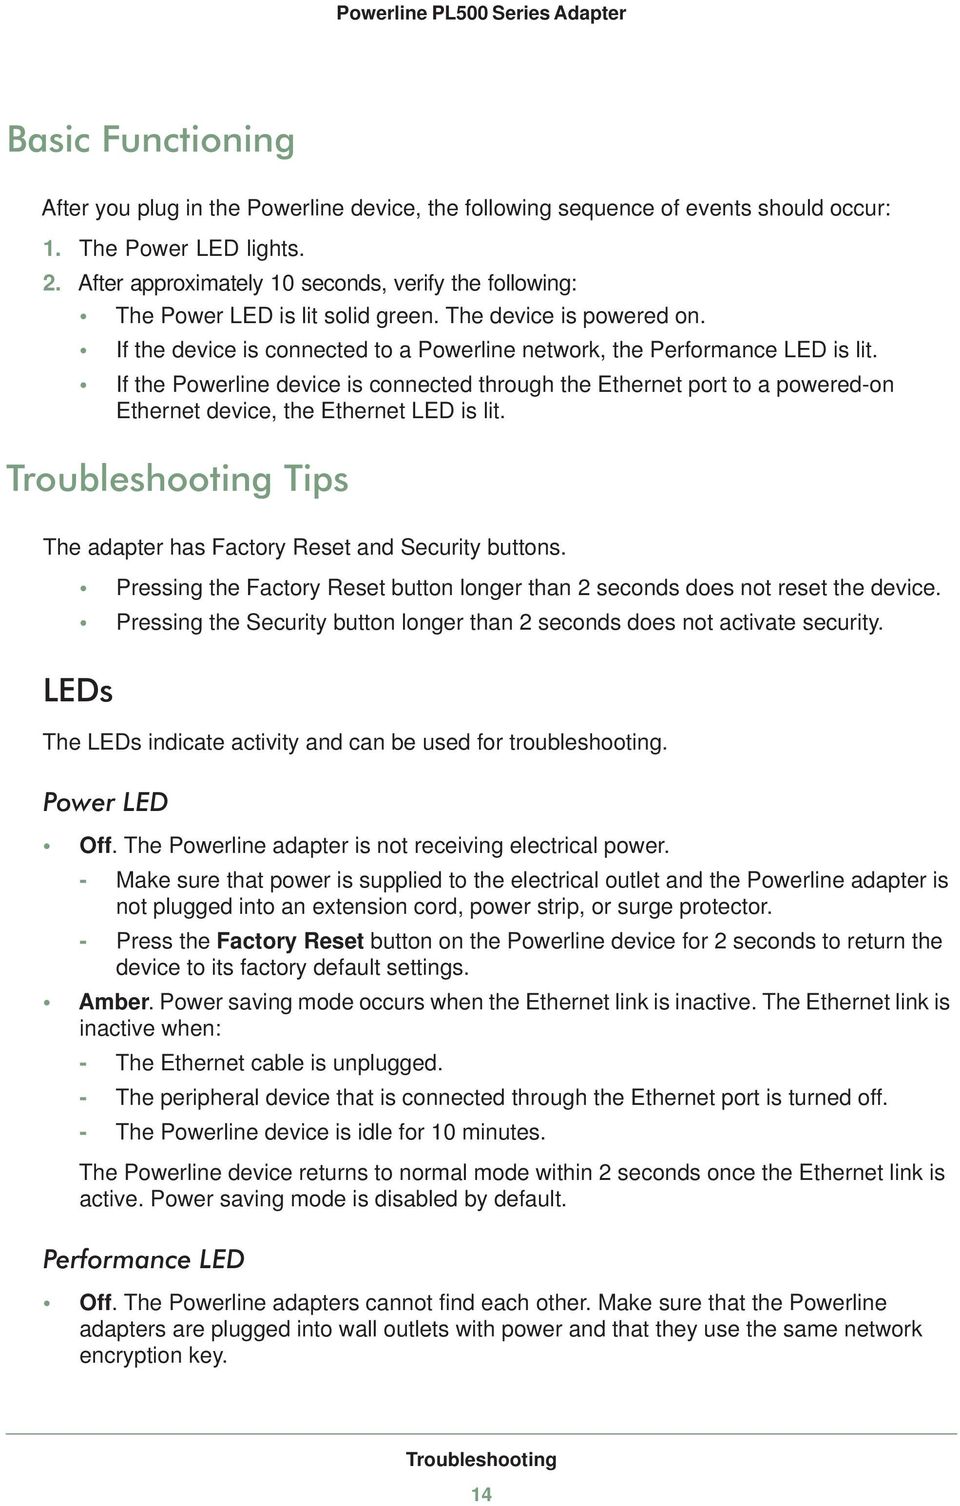 If the Powerline device is connected through the Ethernet port to a powered-on Ethernet device, the Ethernet LED is lit. Troubleshooting Tips The adapter has Factory Reset and Security buttons.